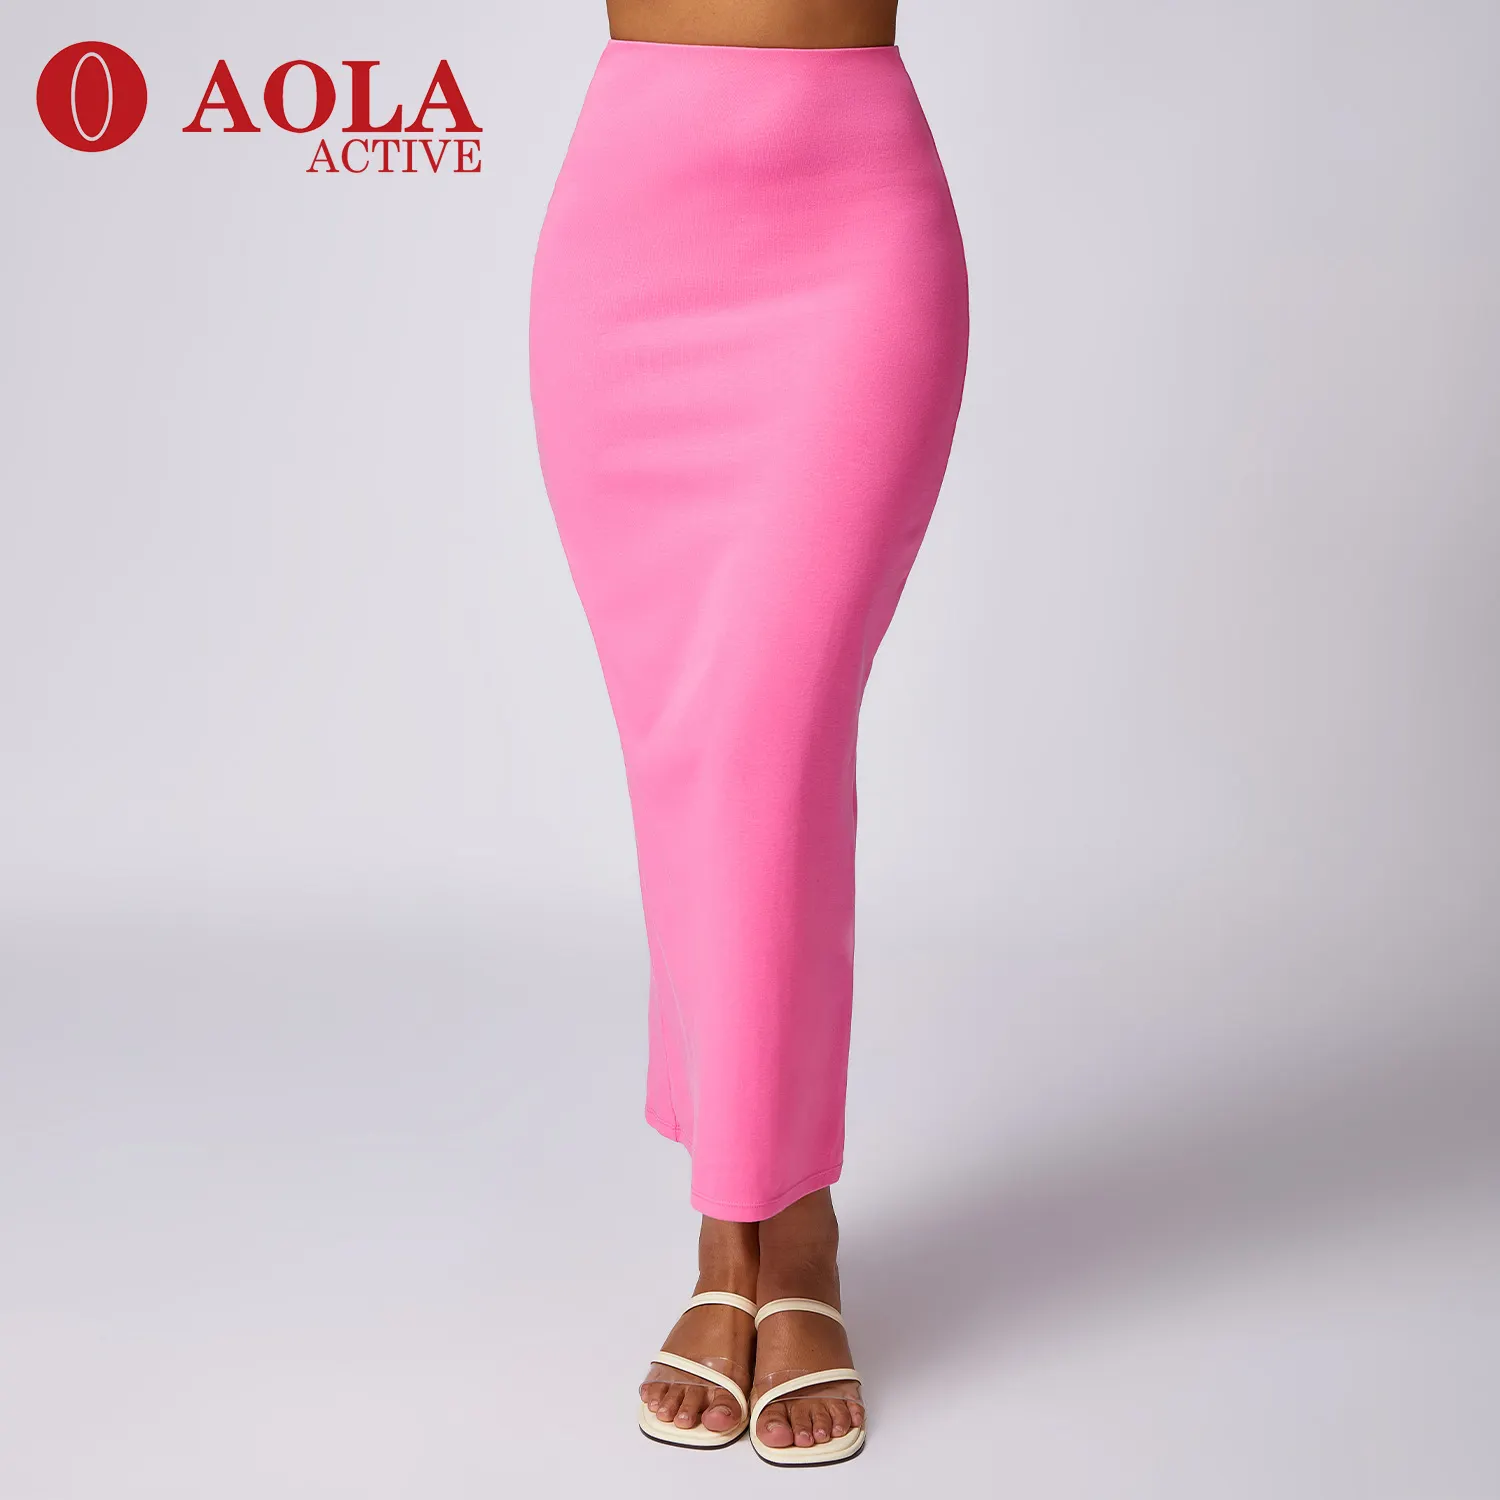 AOLA High Fanny pack hip skirt for women with slim casual skinny MIDI skirt